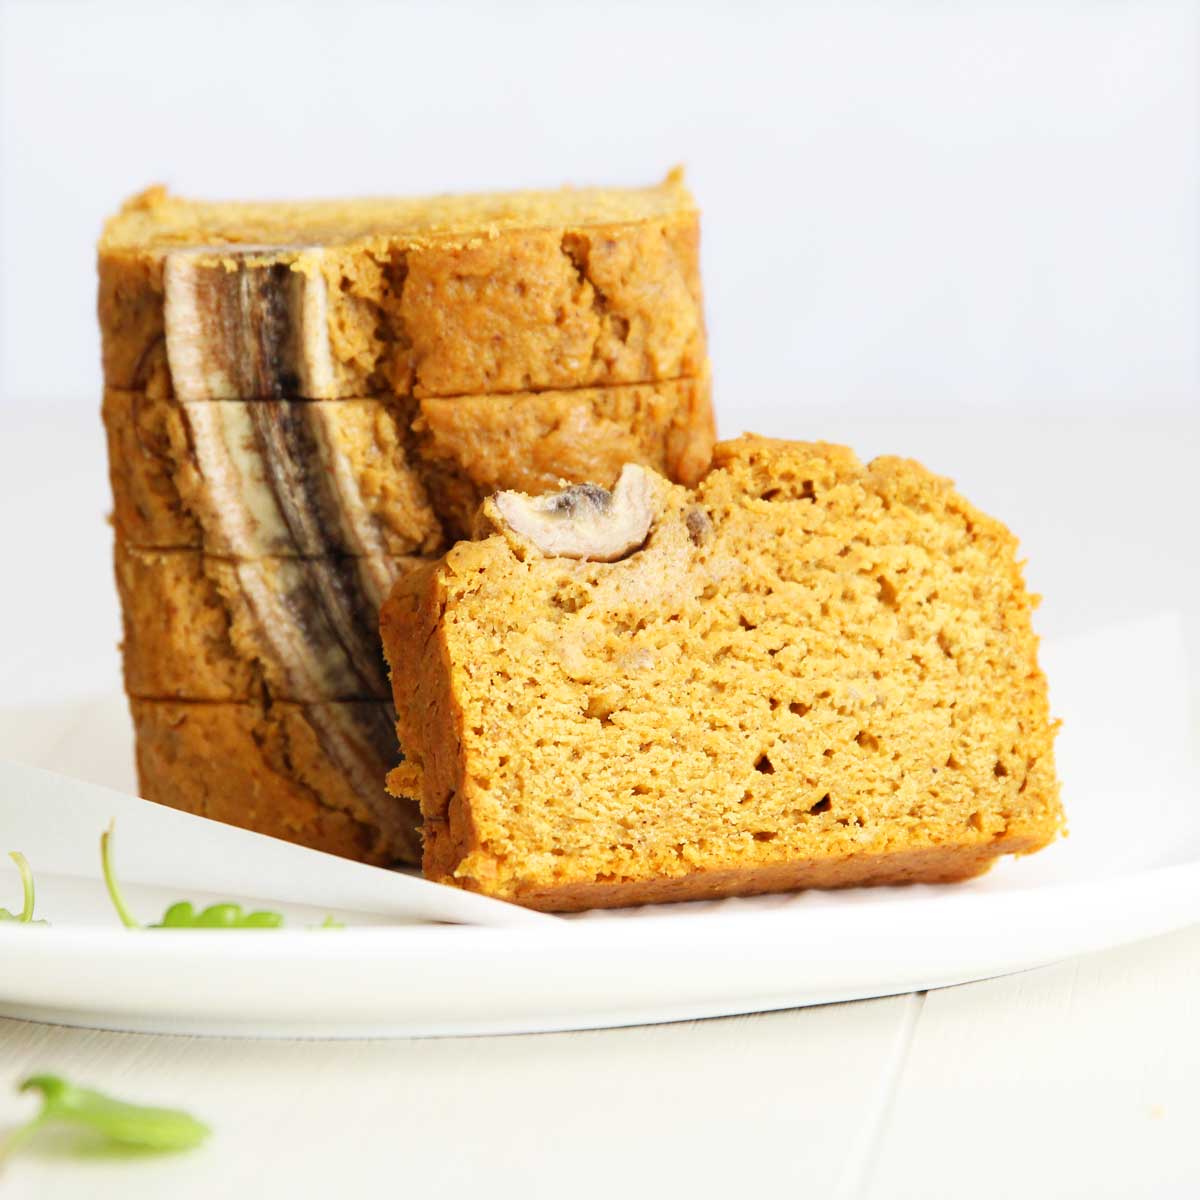 Super Moist Olive Oil Pumpkin Bread With Banana (Eggless & Dairy Free) - Canned Chickpea Yeast Bread